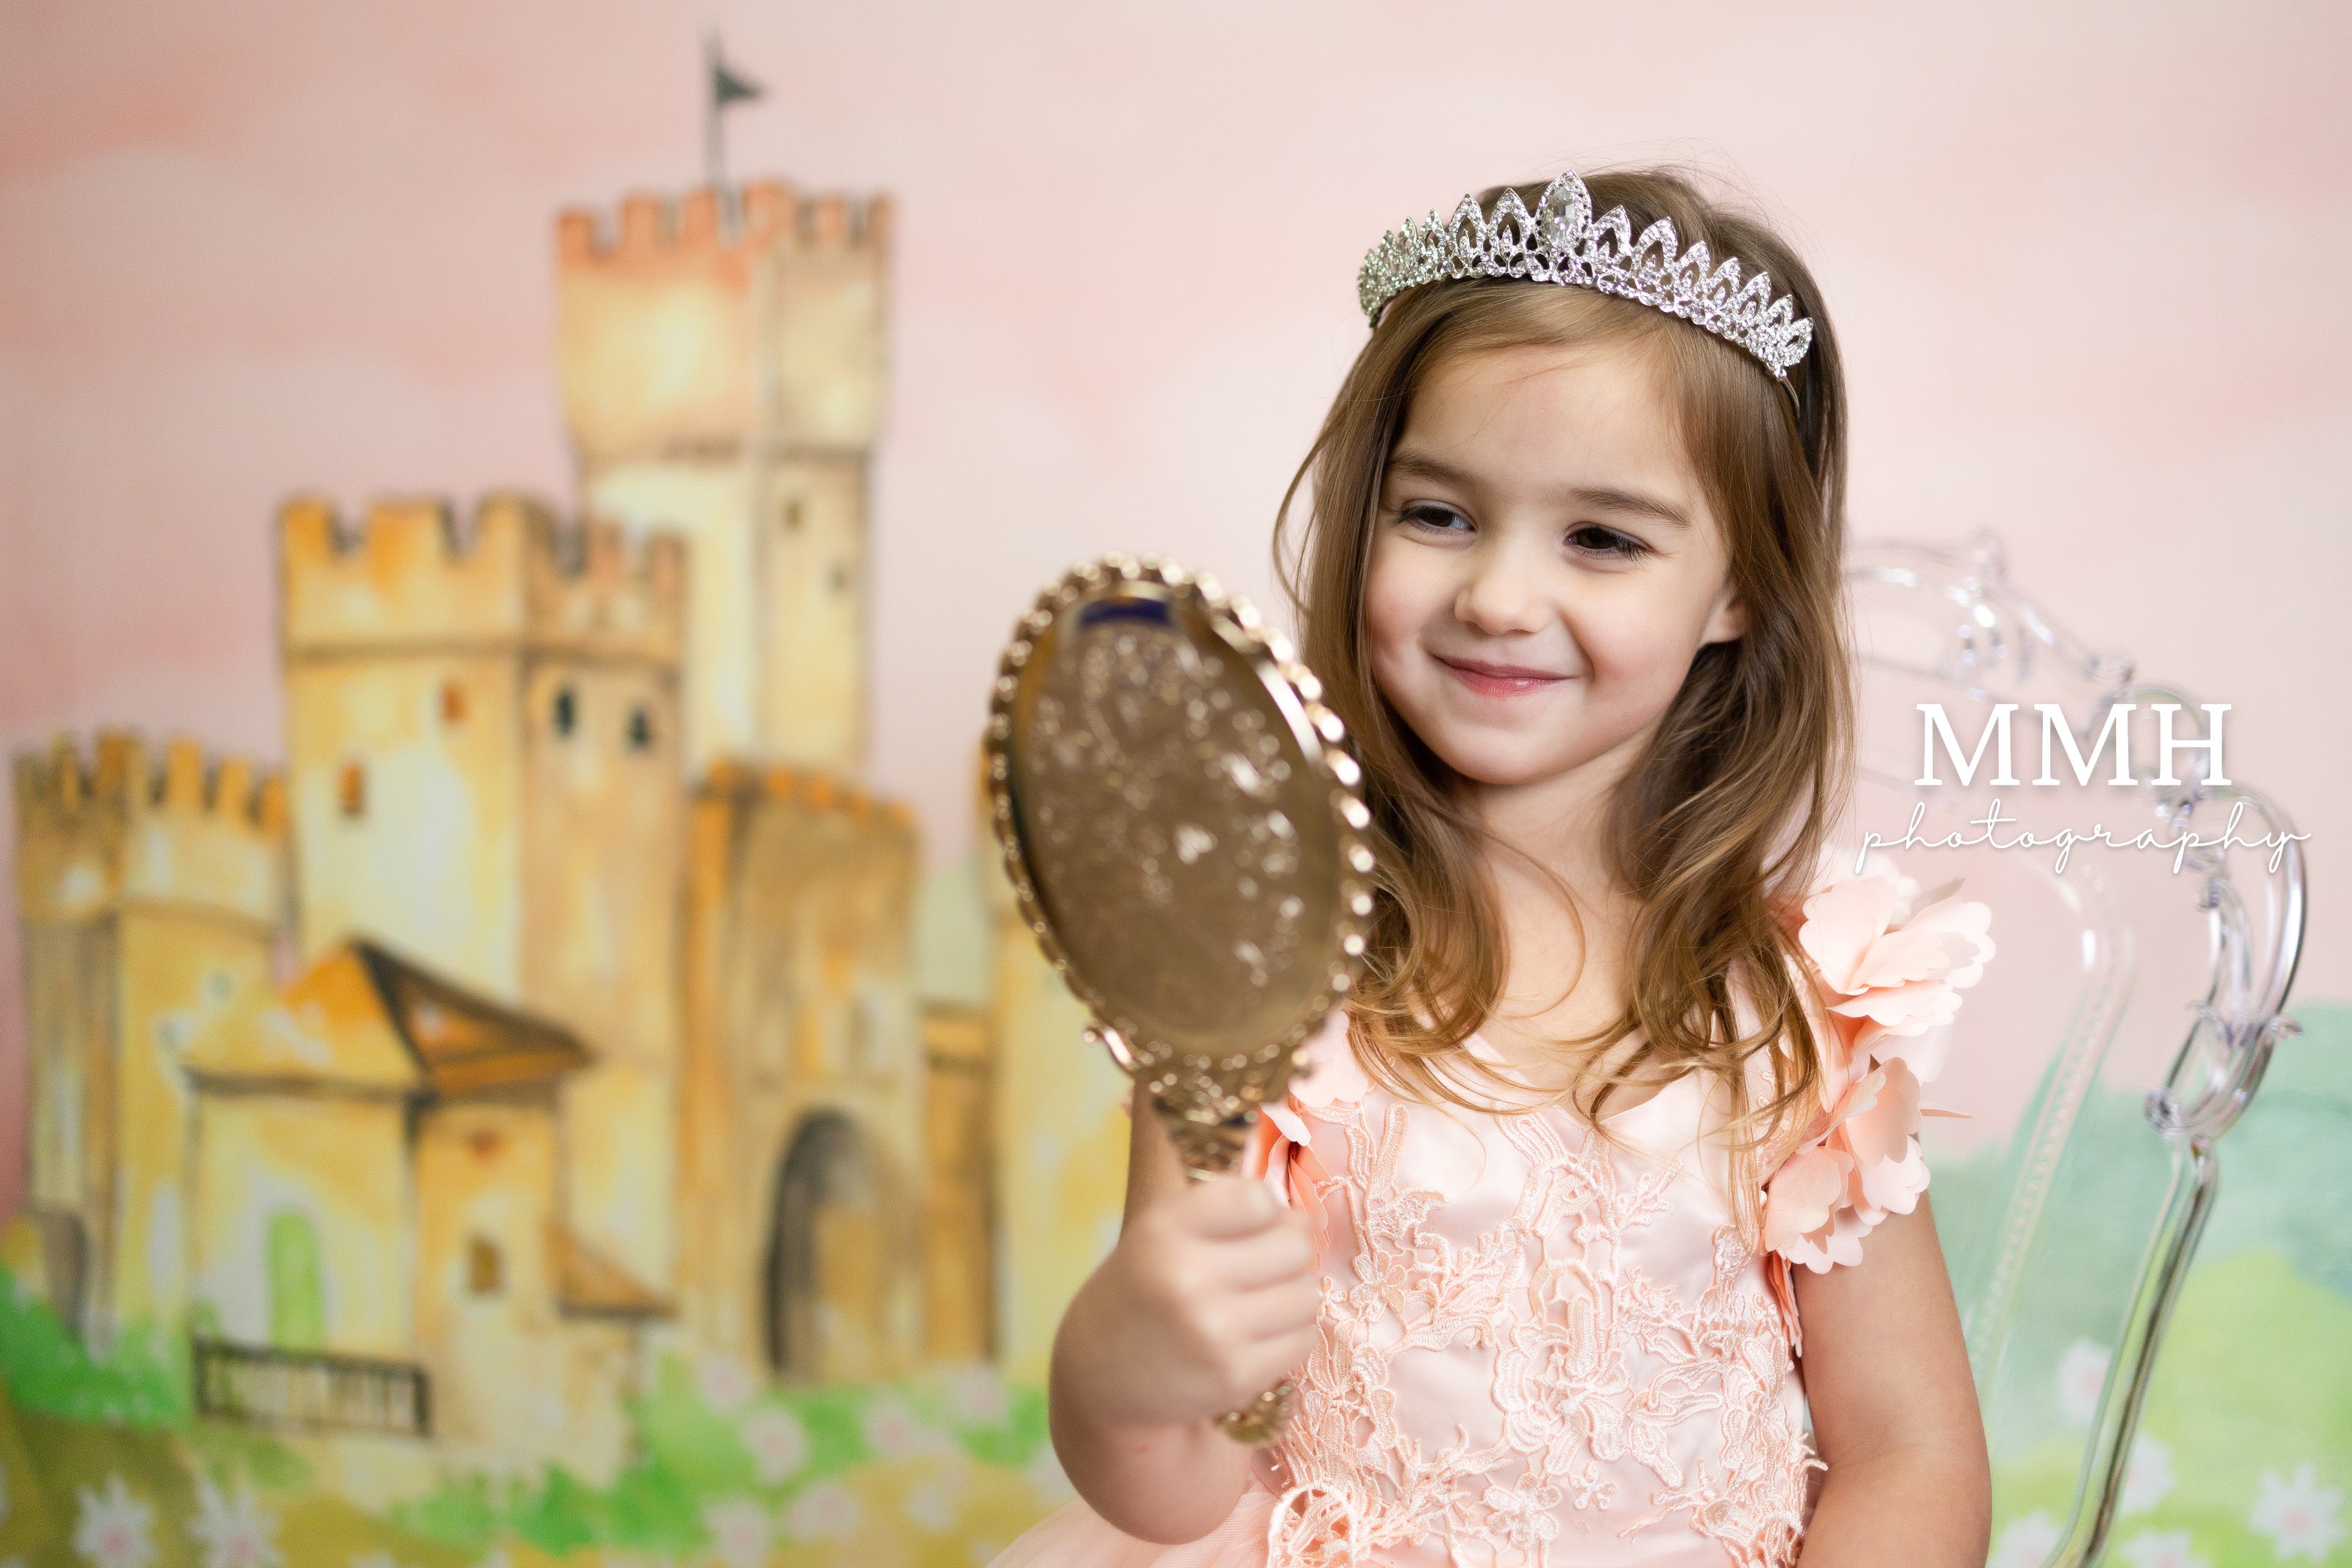 Kate Once Upon a Time - Princess Castle Backdrop Designed by Melissa McCraw-Hummer